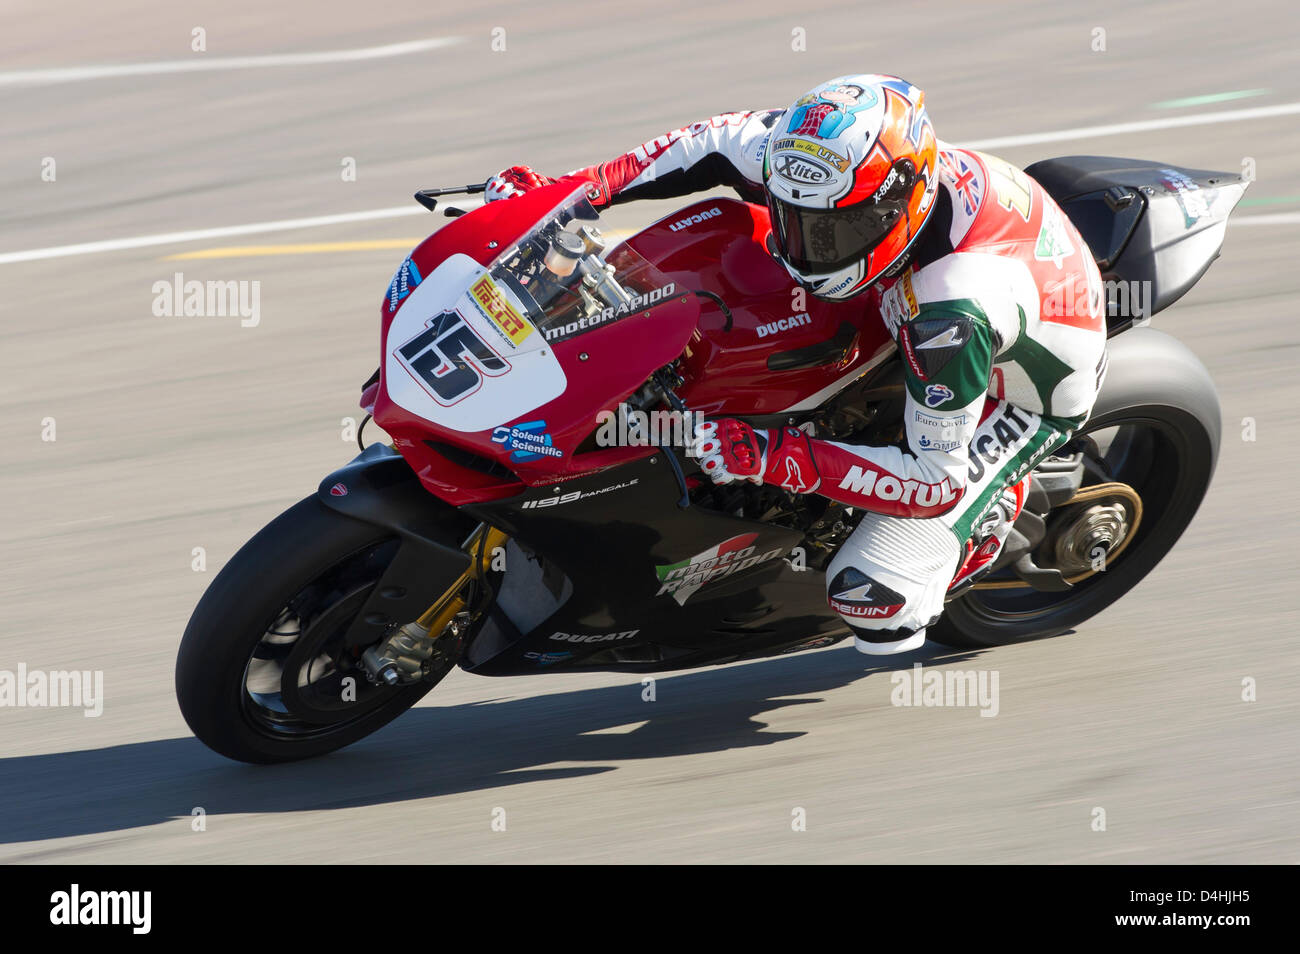 14.03.2013 Derby, England.  15 Matteo Biaocco (ITA) on the Rapido Sport Racing Ducati at Goddards during the official testing session of the MCE Insurance British Superbike Test Day at Donington Park, Derby. England Stock Photo